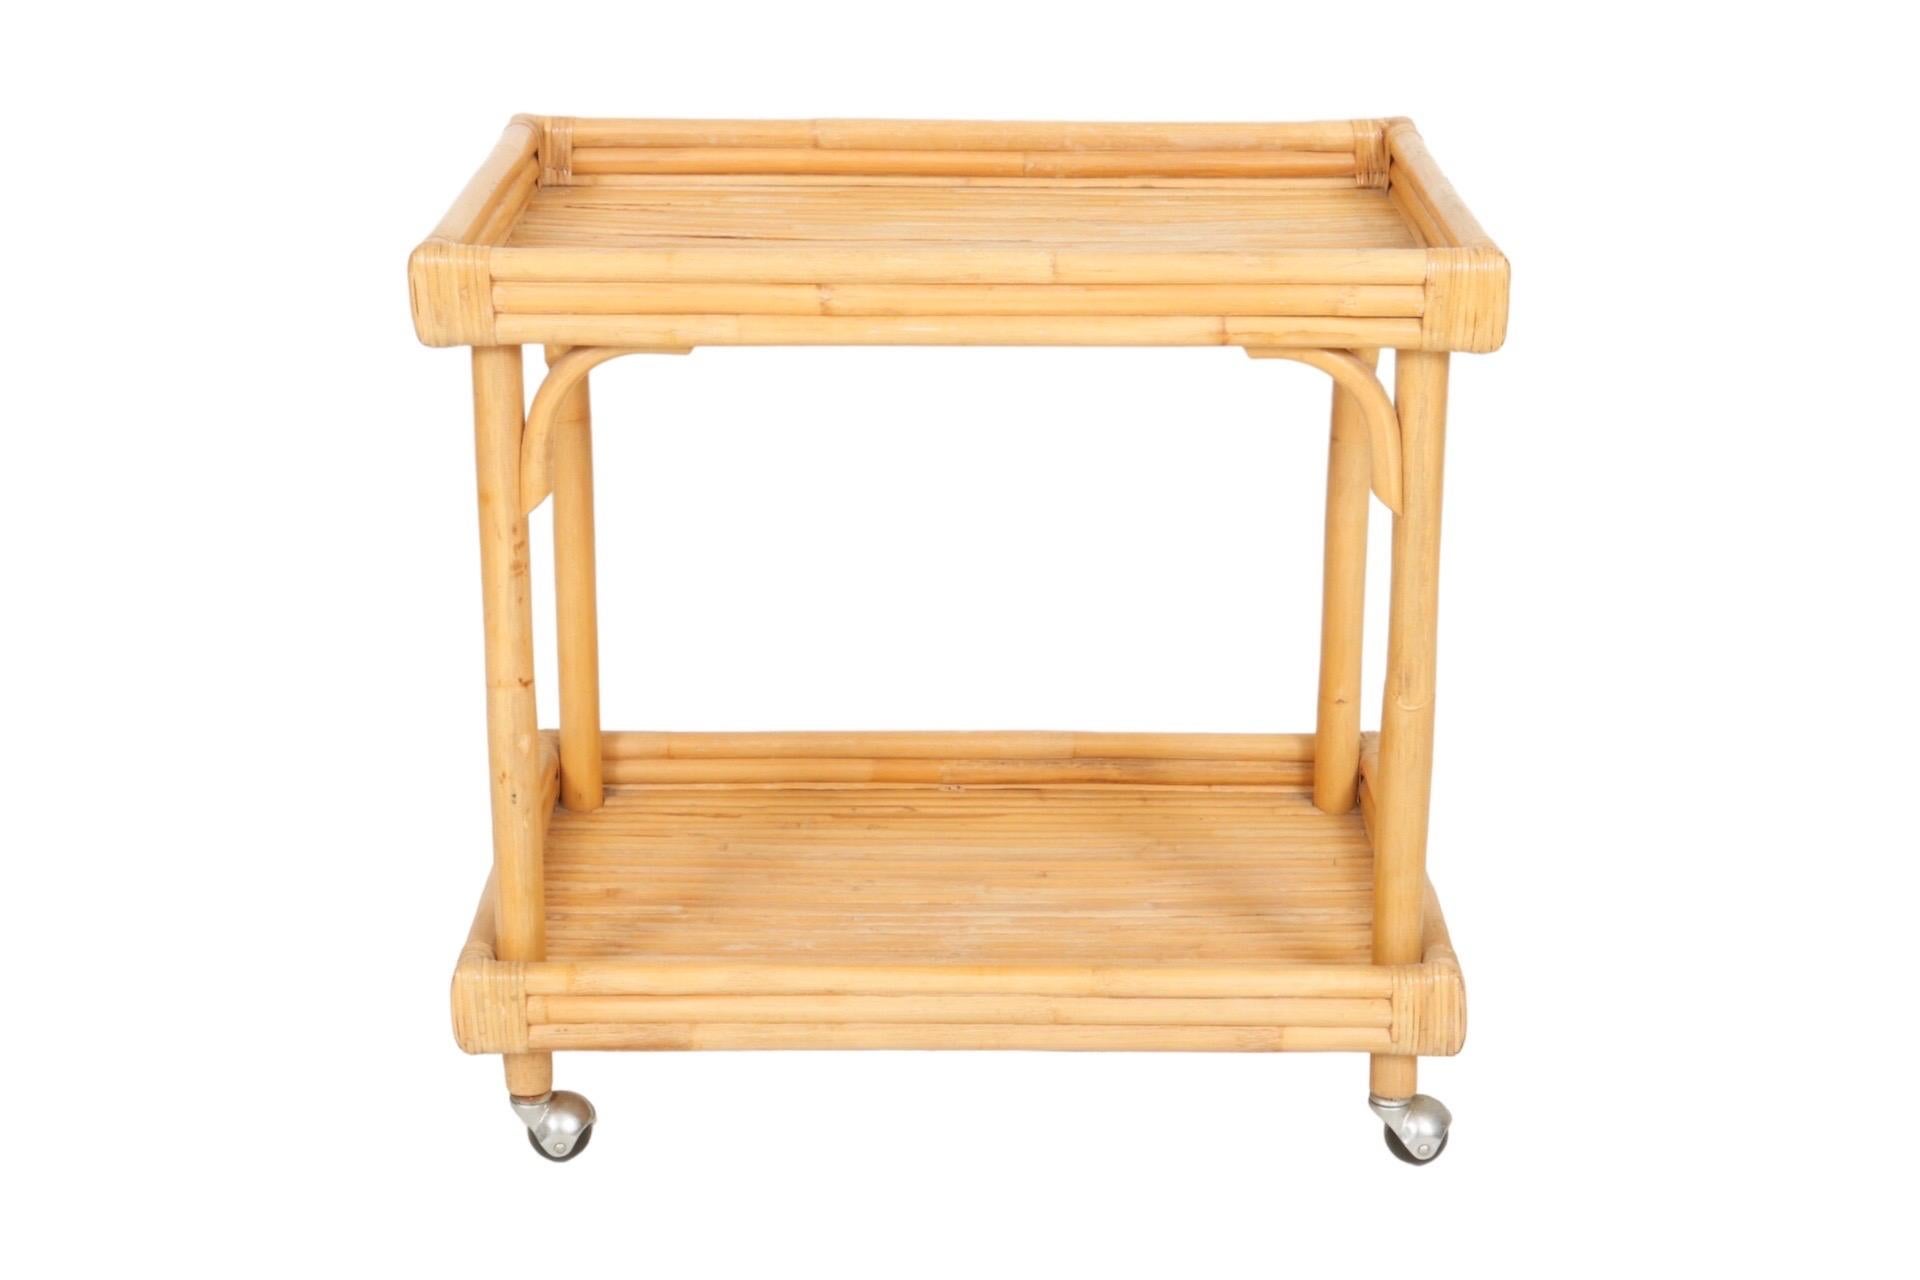 A bamboo and rattan bar cart with bentwood bamboo corners. Two tray like shelves are made with bamboo pieces with bamboo sides. Corners are secured with rattan binding and silver metal ball castors allow the bar cart to move easily in all directions.